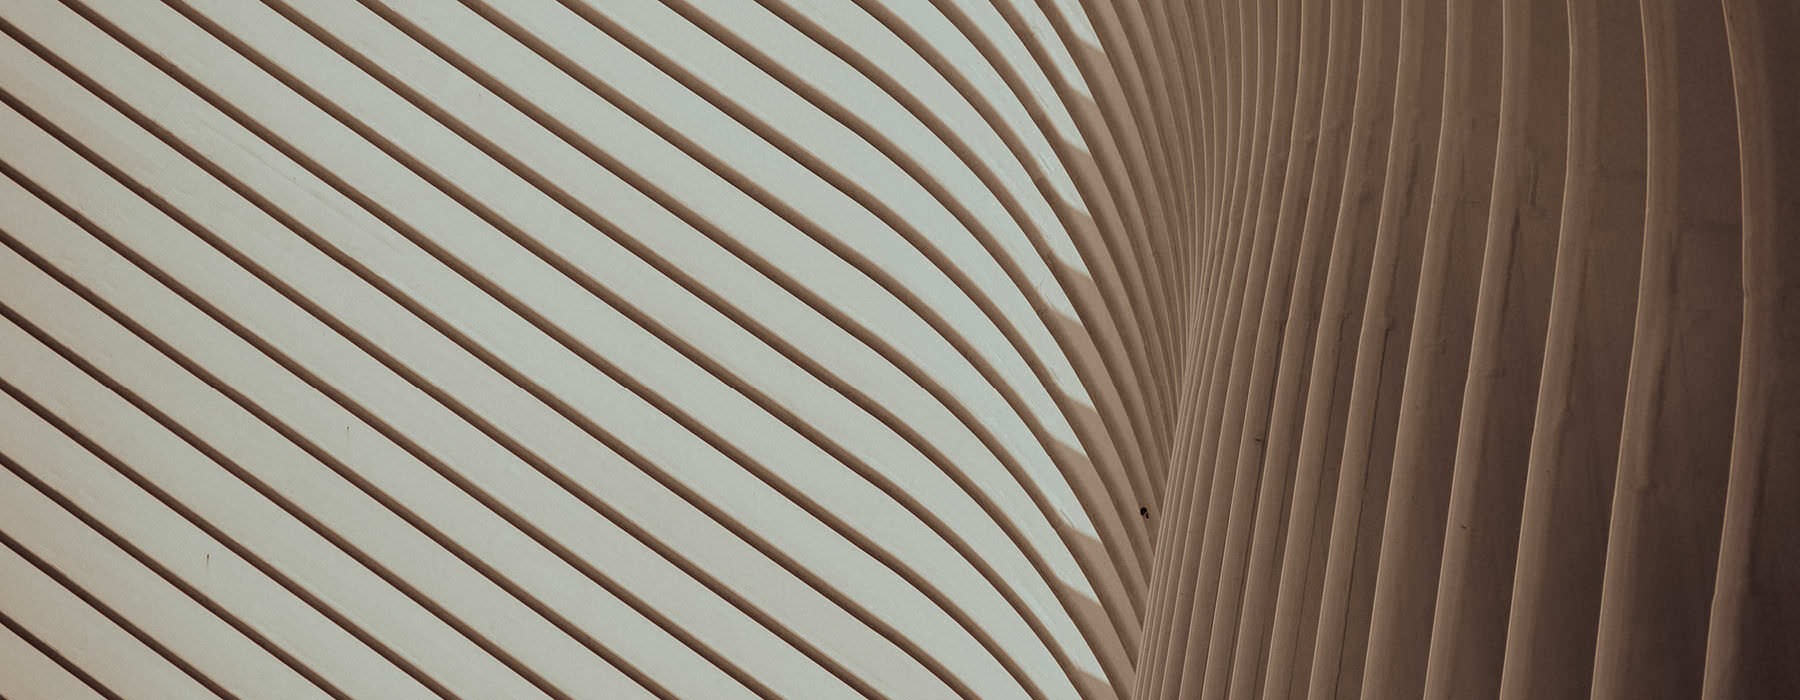 close up photograph of line pattern